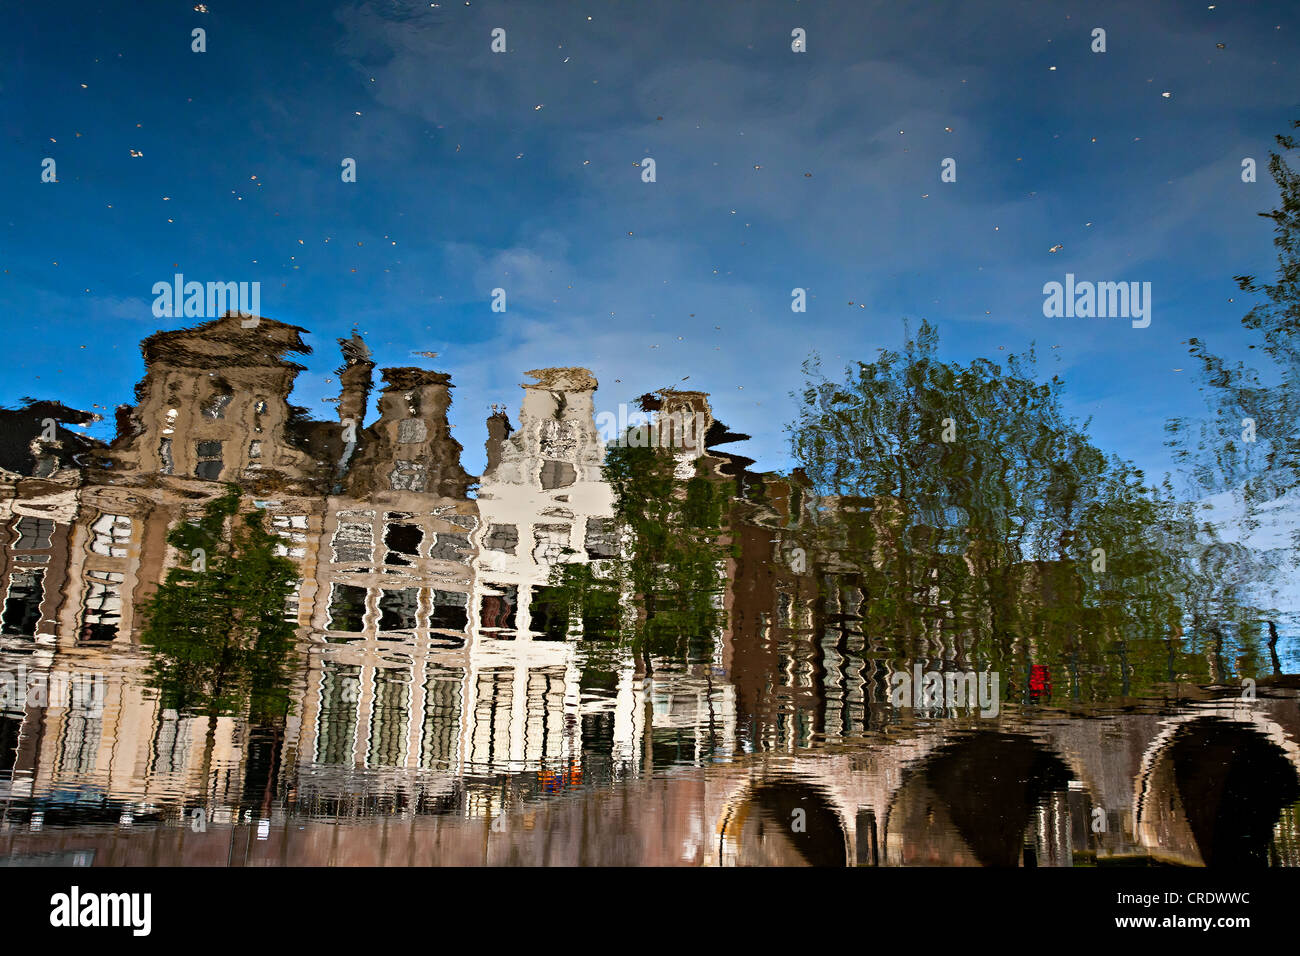 Reflection of buildings in a canal, Amsterdam, Holland, Netherlands, Europe Stock Photo